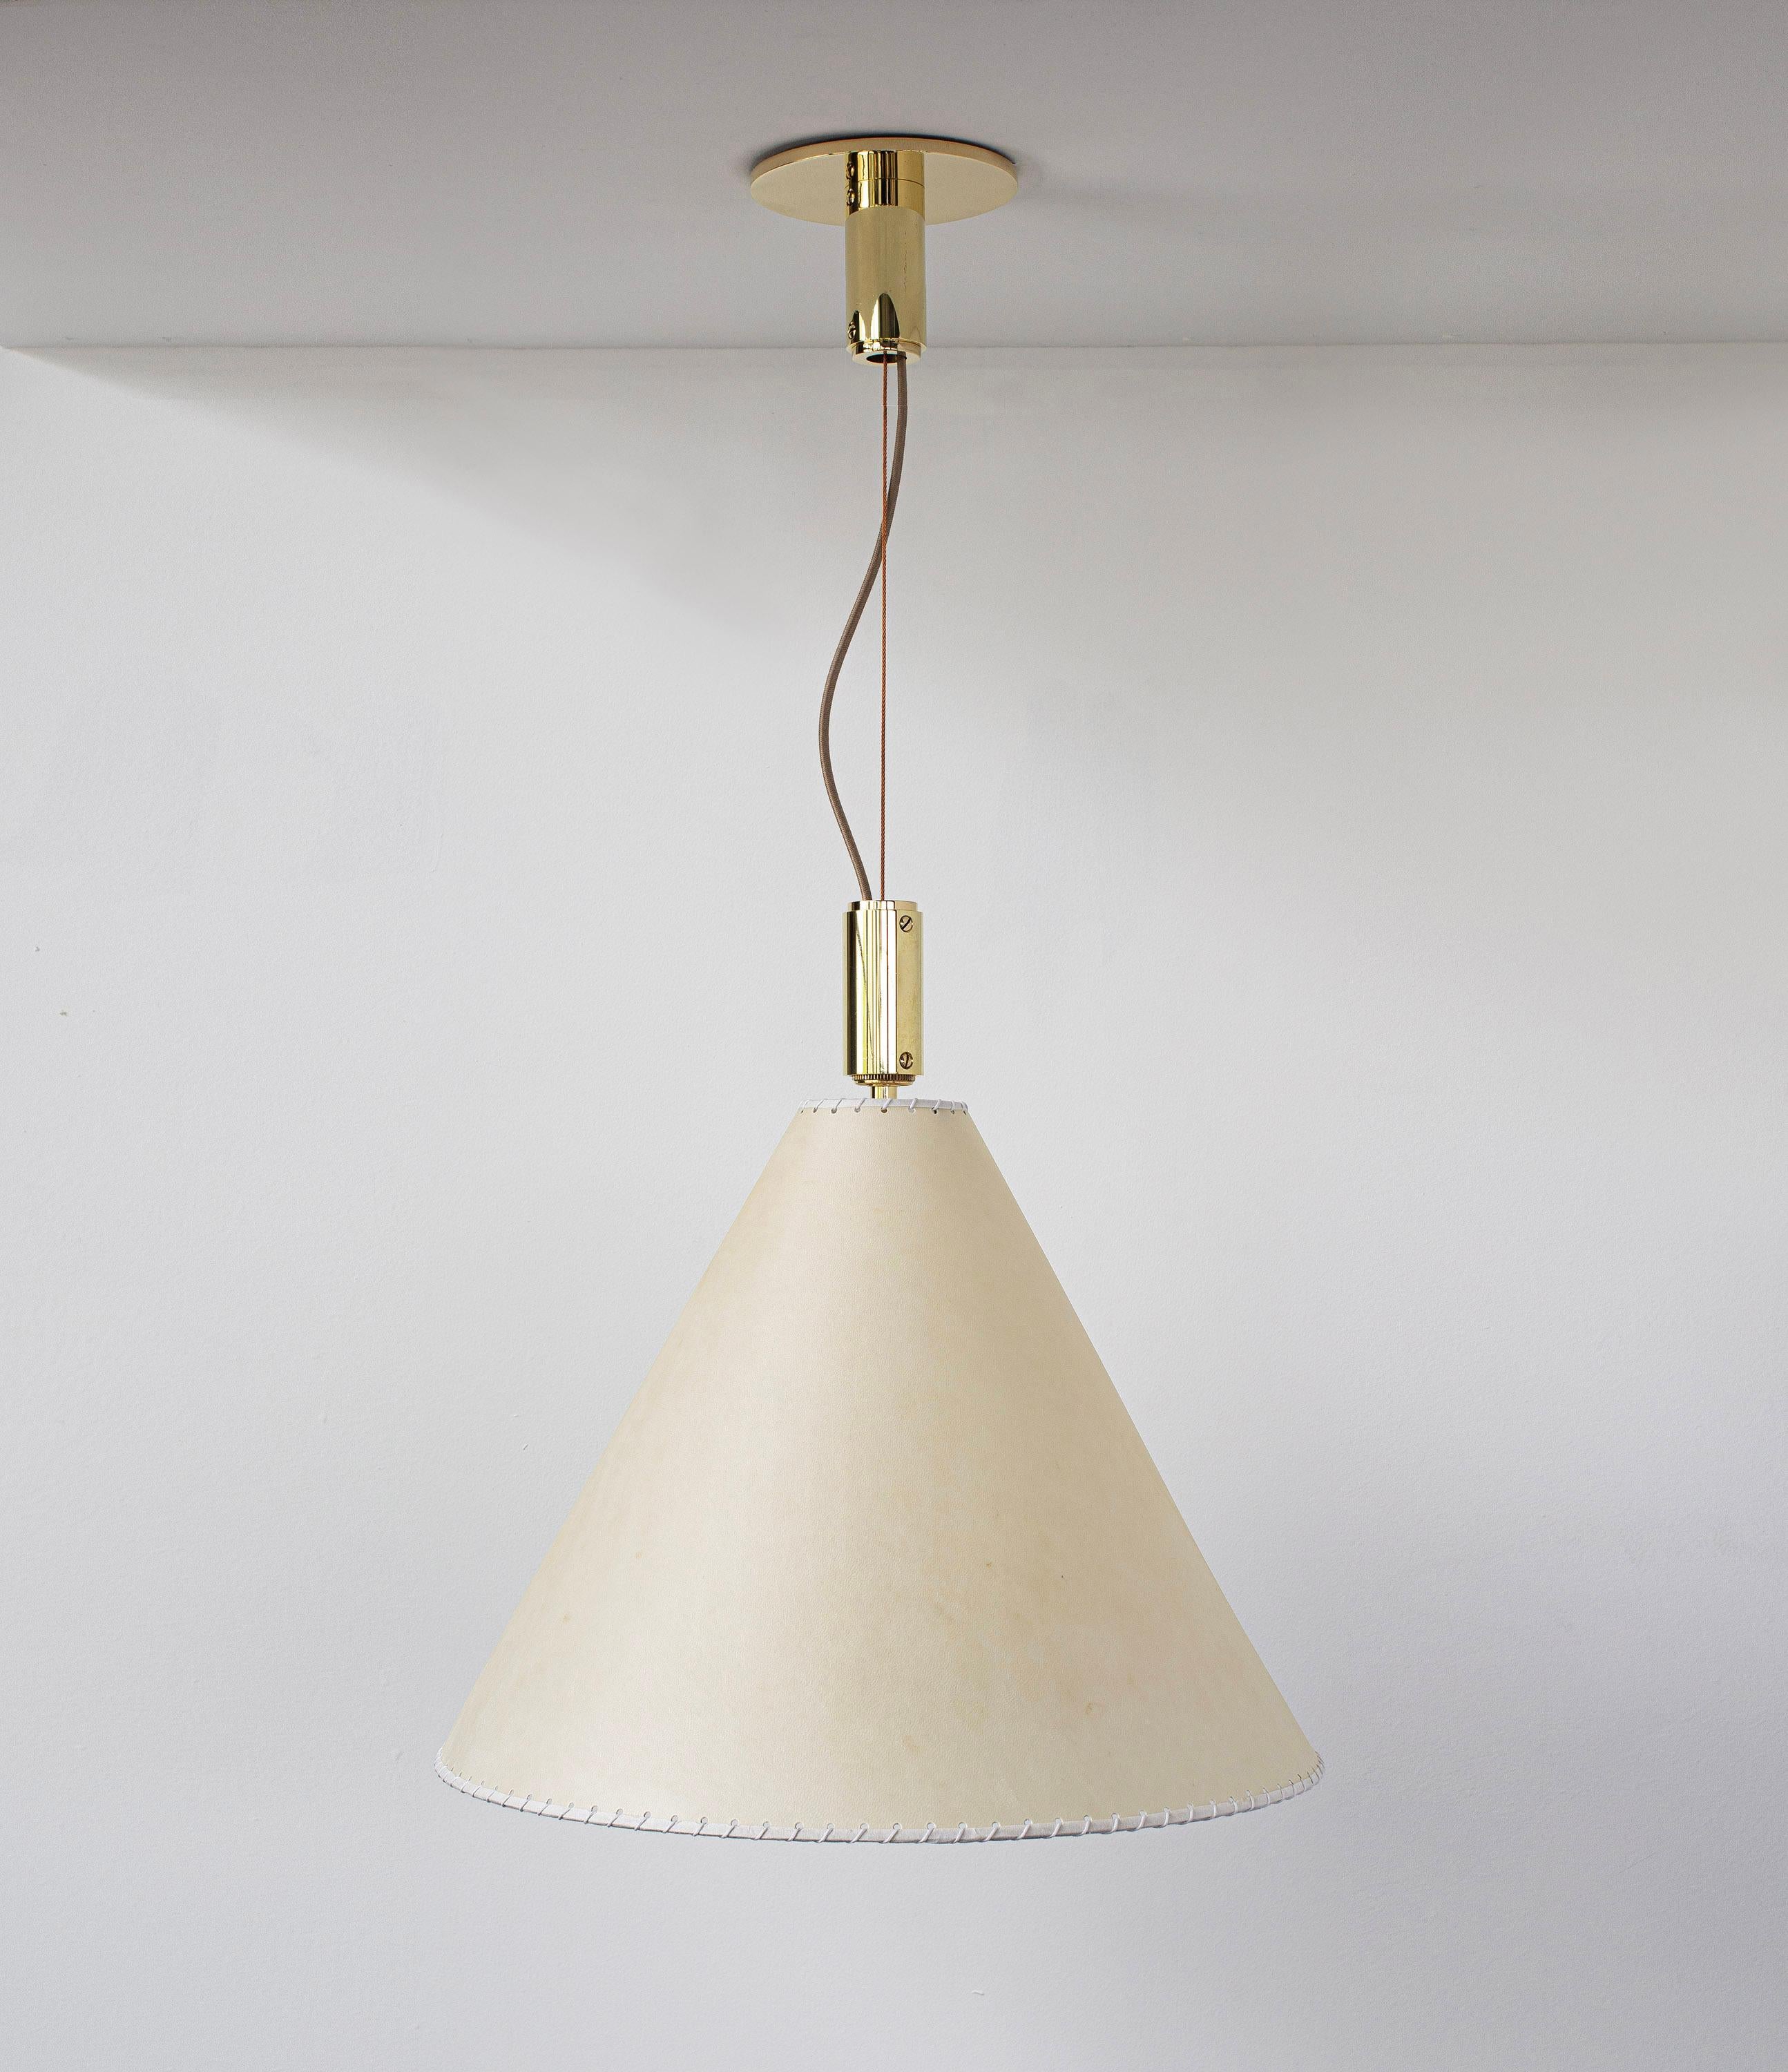 Solid machined brass, hand-stitched goatskin parchment shade with diffuser. Goatskin parchment is an excellent diffuser of light and is naturally figured and textured, similar to the surface of the moon.

All material finishes are living finishes: